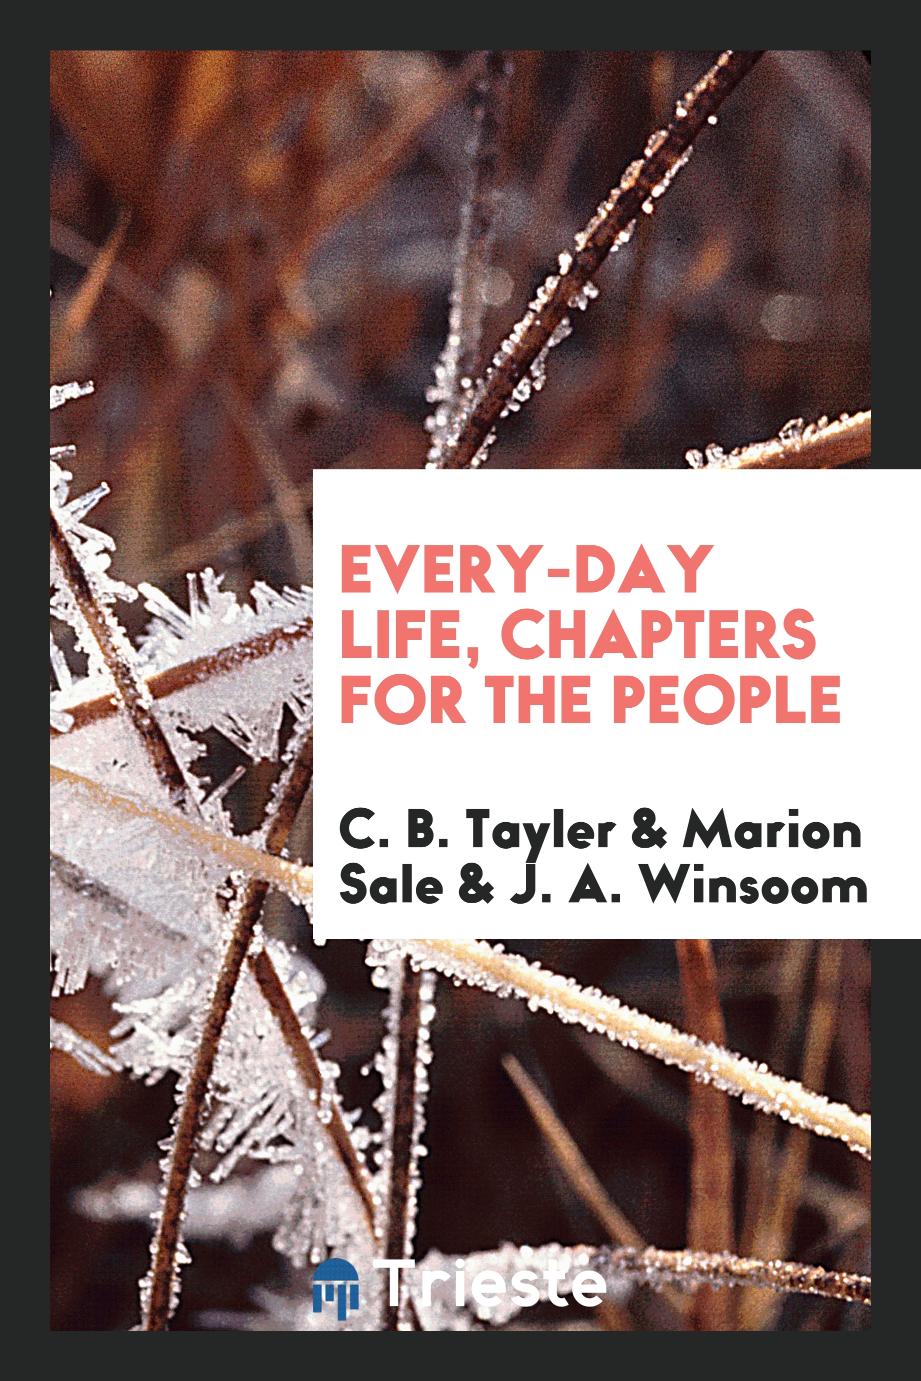 Every-Day Life, Chapters for the People